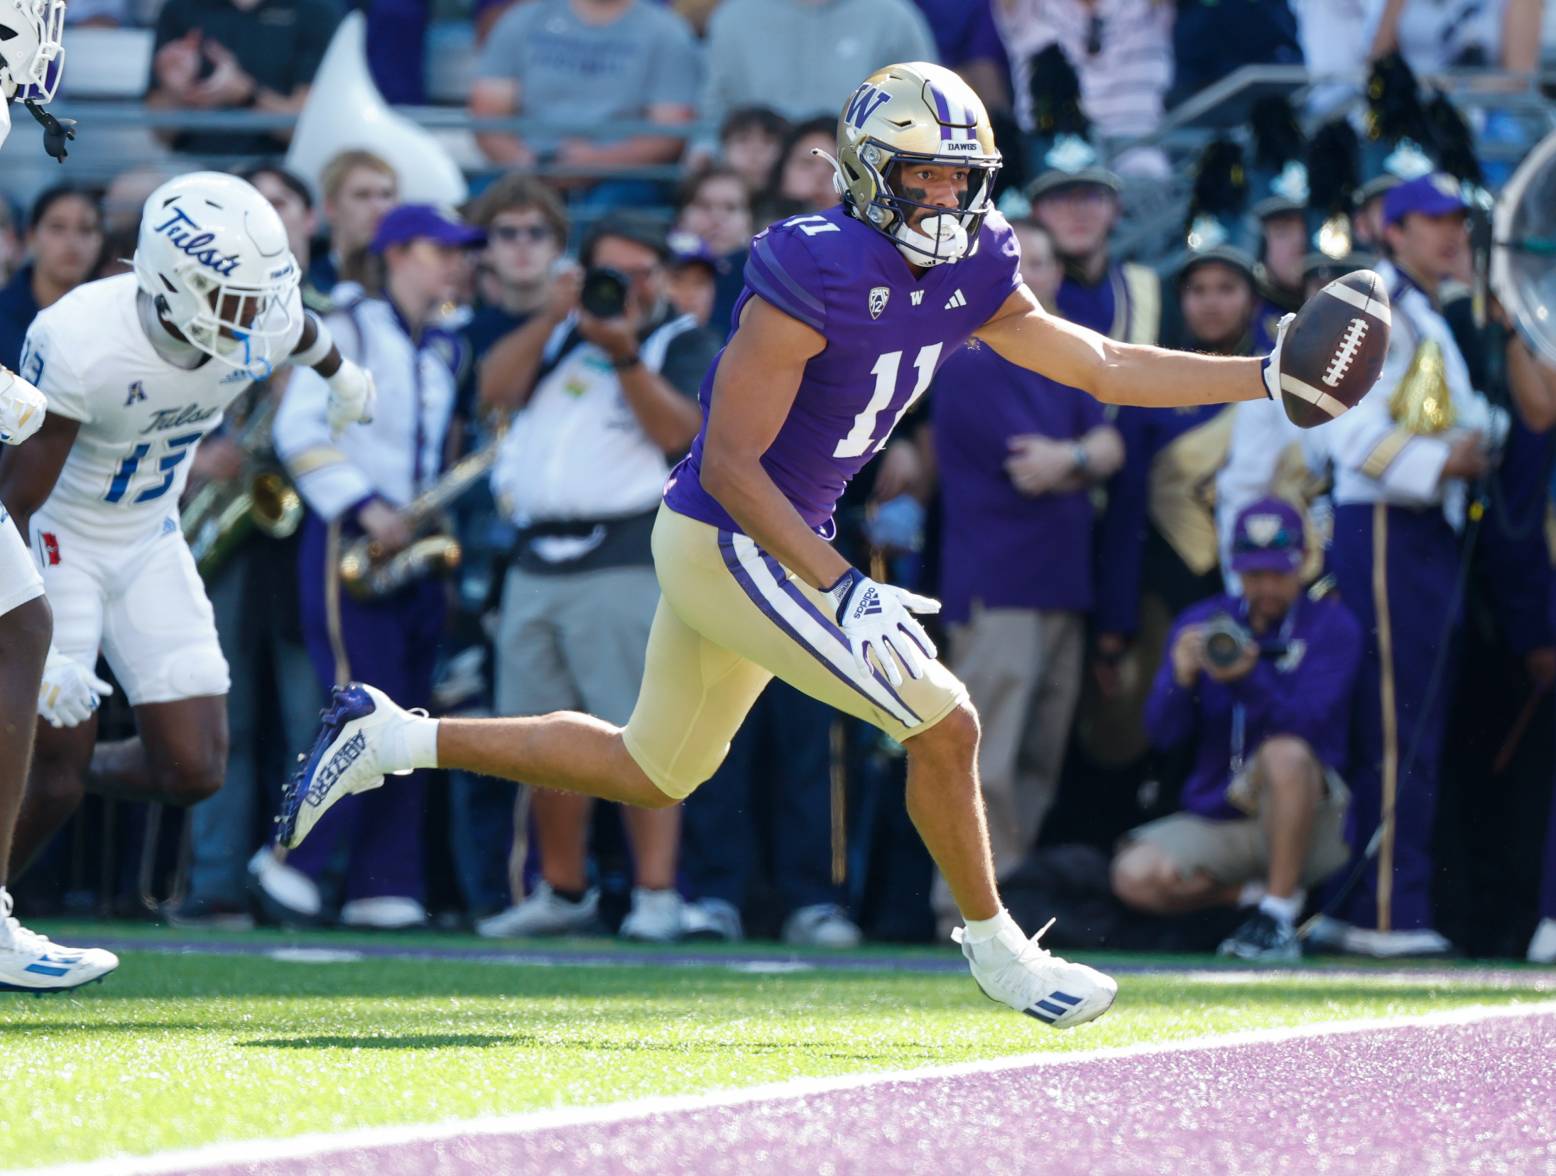 Sep 9, 2023; Seattle, Washington, USA; Washington Huskies wide receiver Jalen McMillan (11) extends the ball out for a receiving touchdown against the Tulsa Golden Hurricane during the second quarter at Alaska Airlines Field at Husky Stadium. Credit: Joe Nicholson-USA TODAY Sports